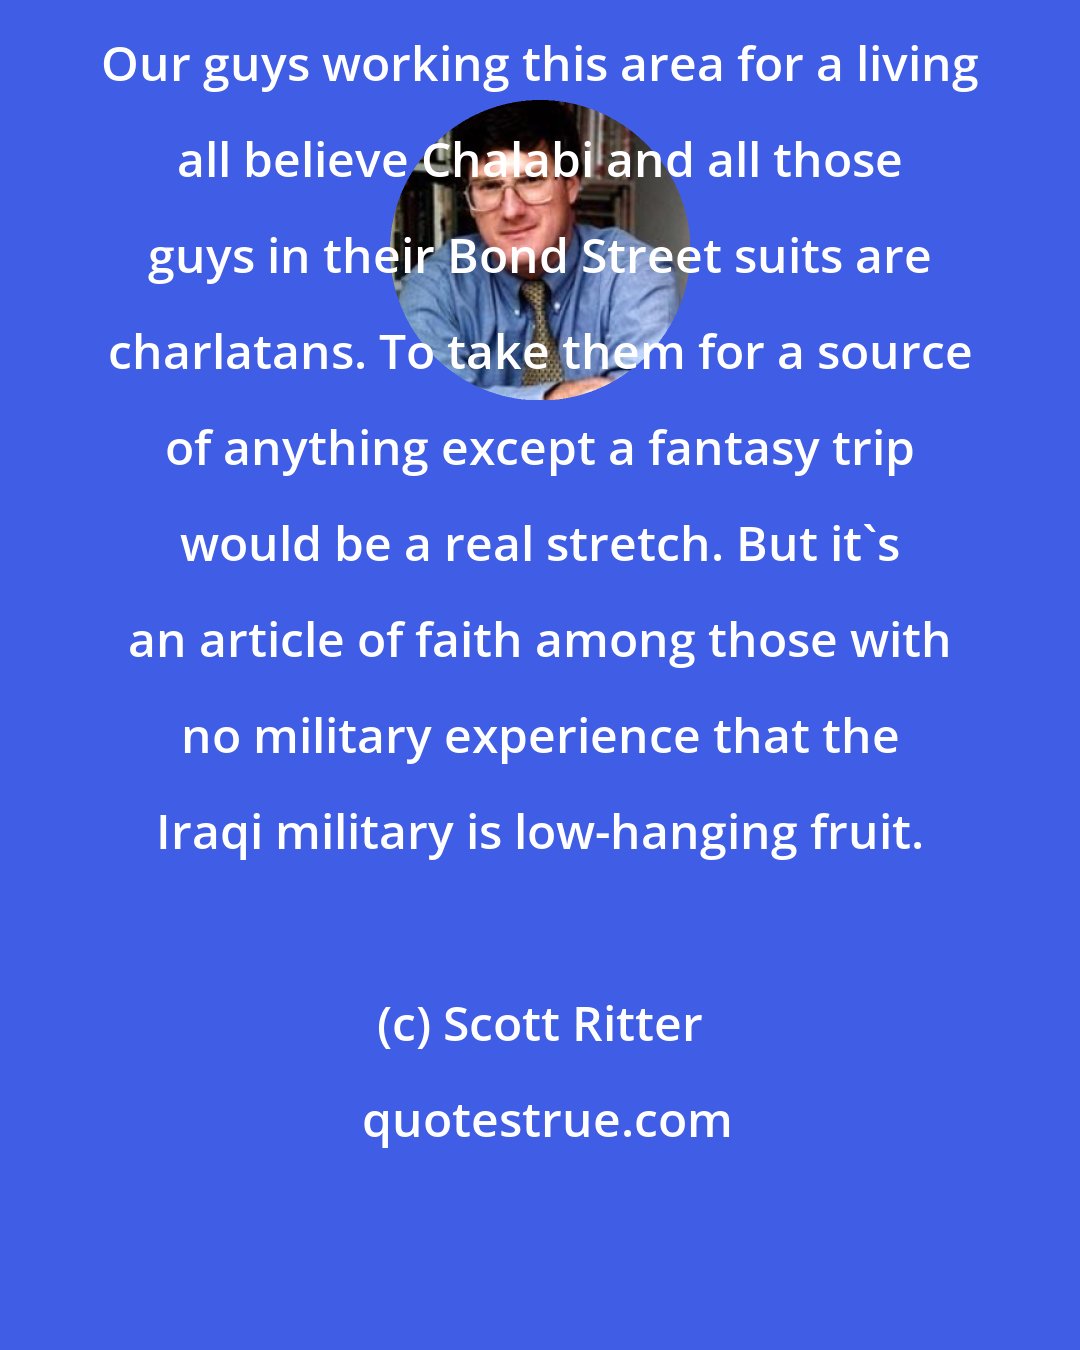 Scott Ritter: Our guys working this area for a living all believe Chalabi and all those guys in their Bond Street suits are charlatans. To take them for a source of anything except a fantasy trip would be a real stretch. But it's an article of faith among those with no military experience that the Iraqi military is low-hanging fruit.